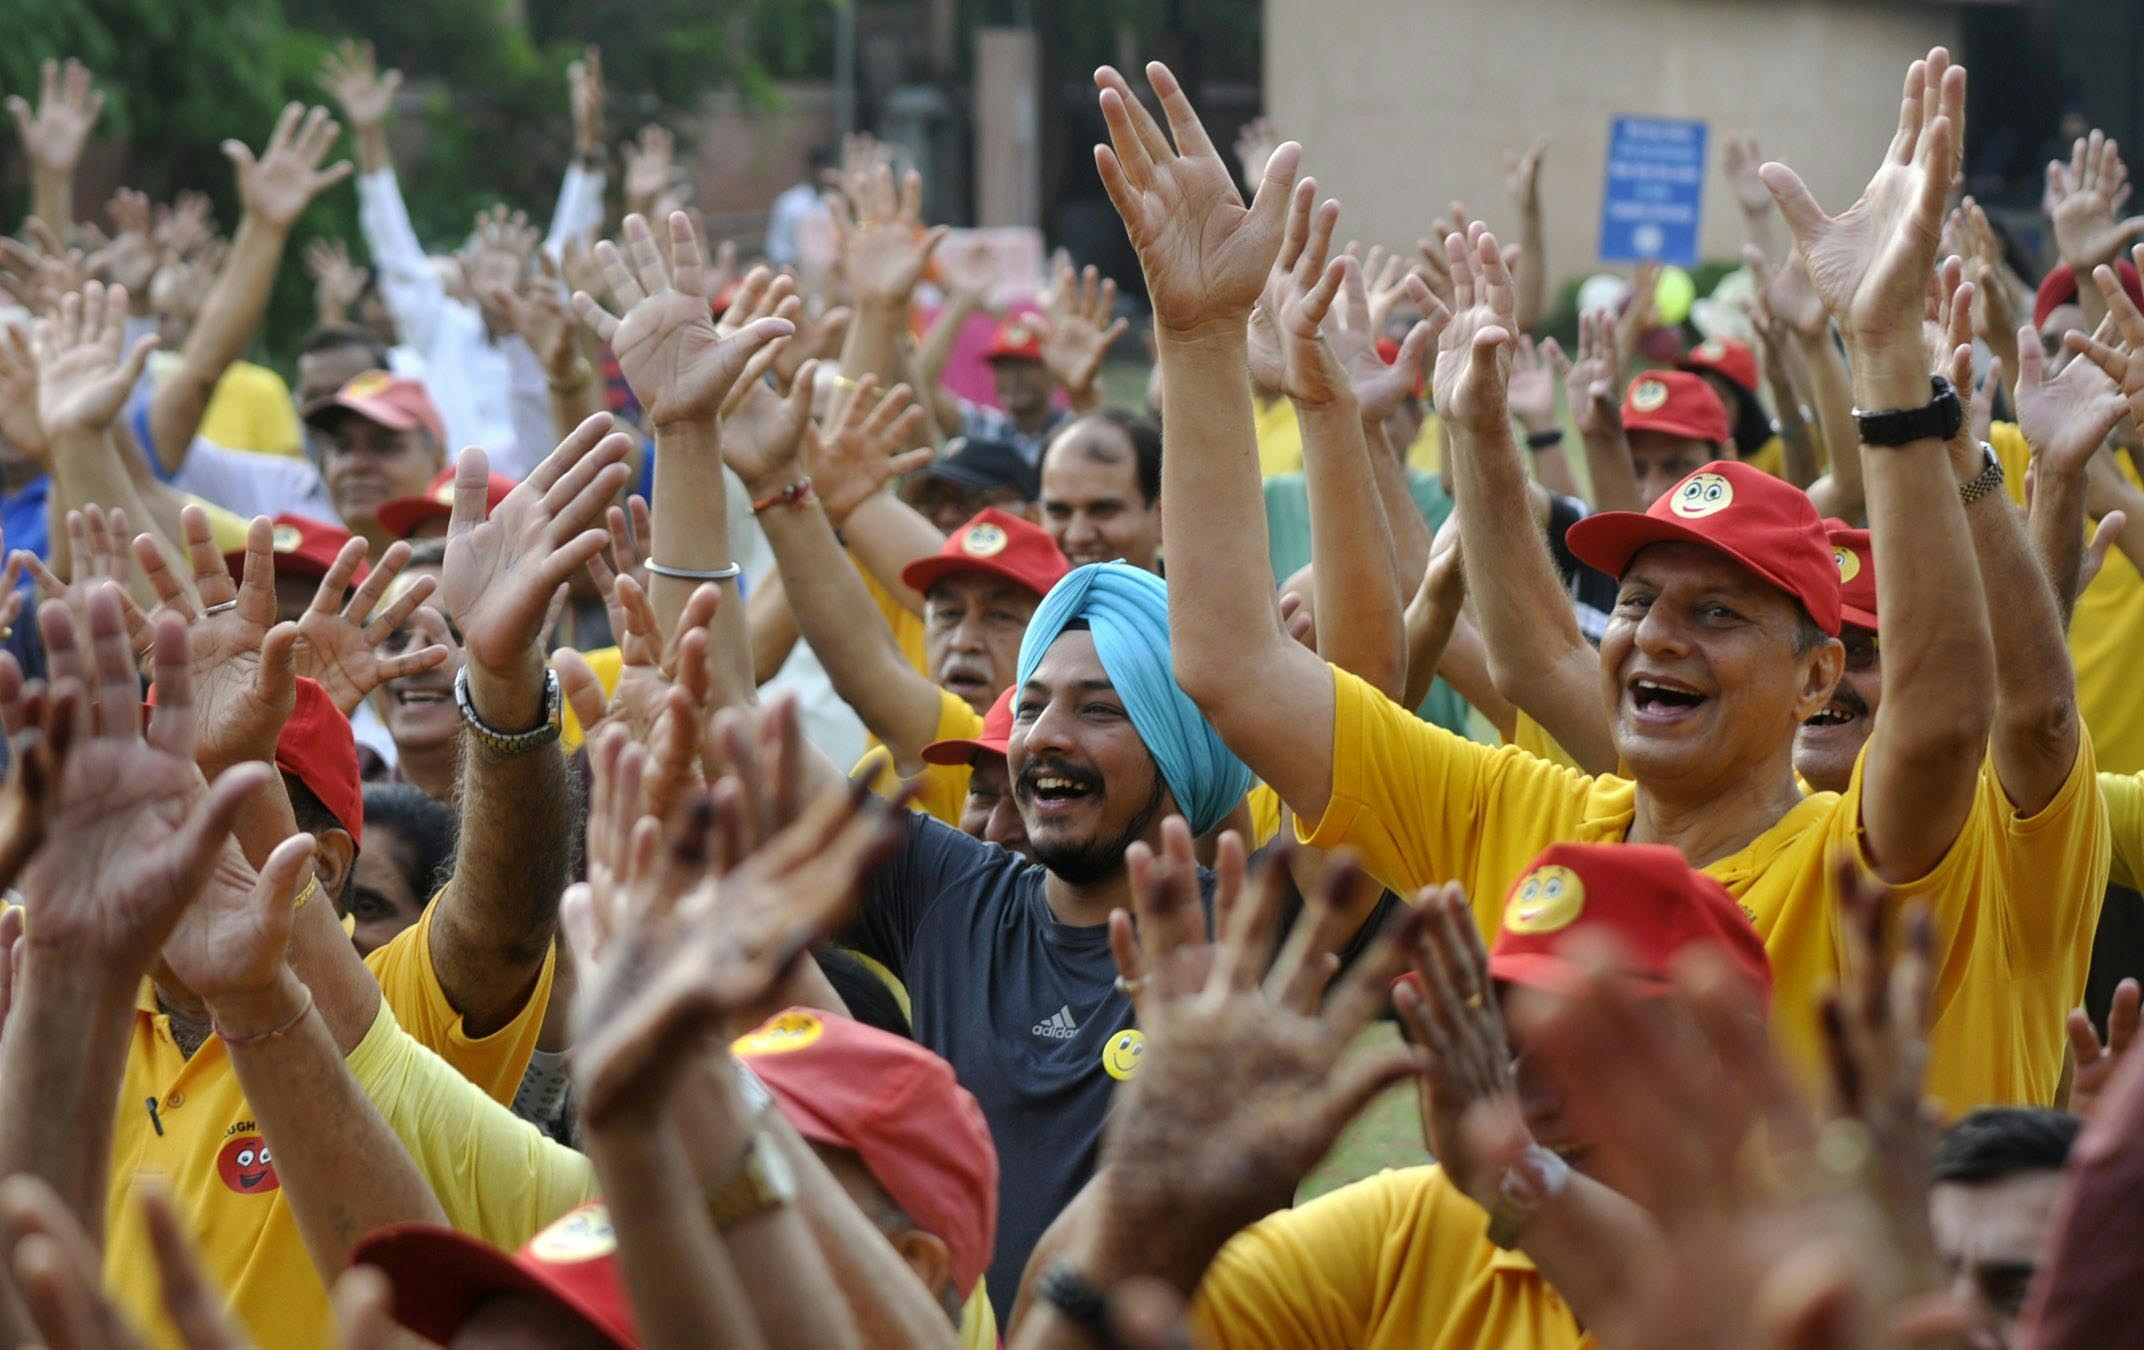 A large group of people raise their hands in the air and laugh during a laughter yoga class in India.